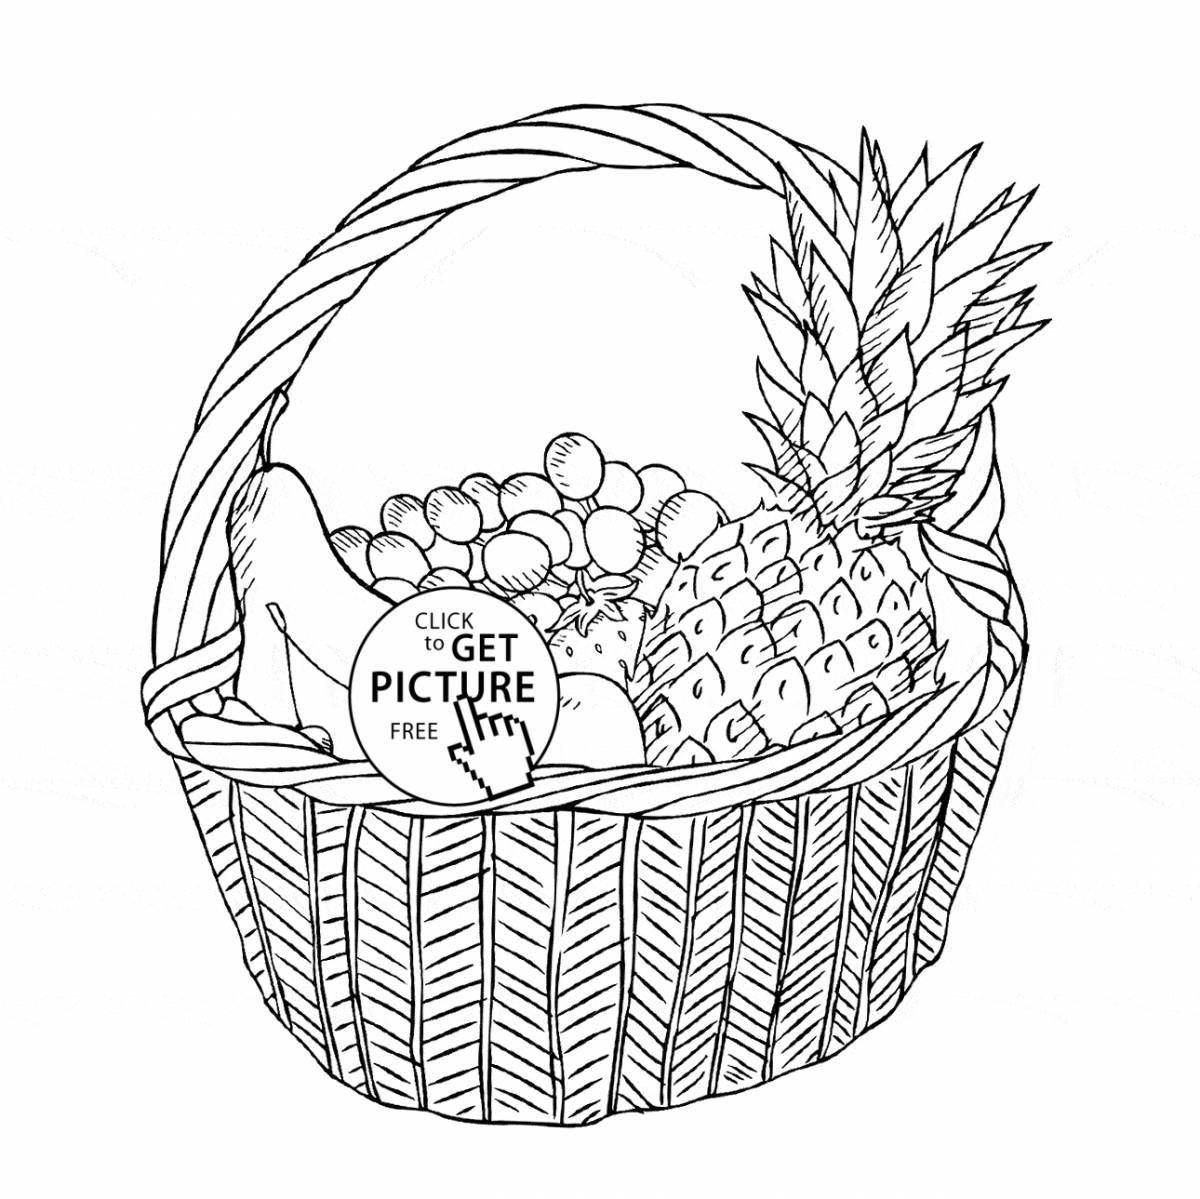 Colored fruits and vegetables in a basket